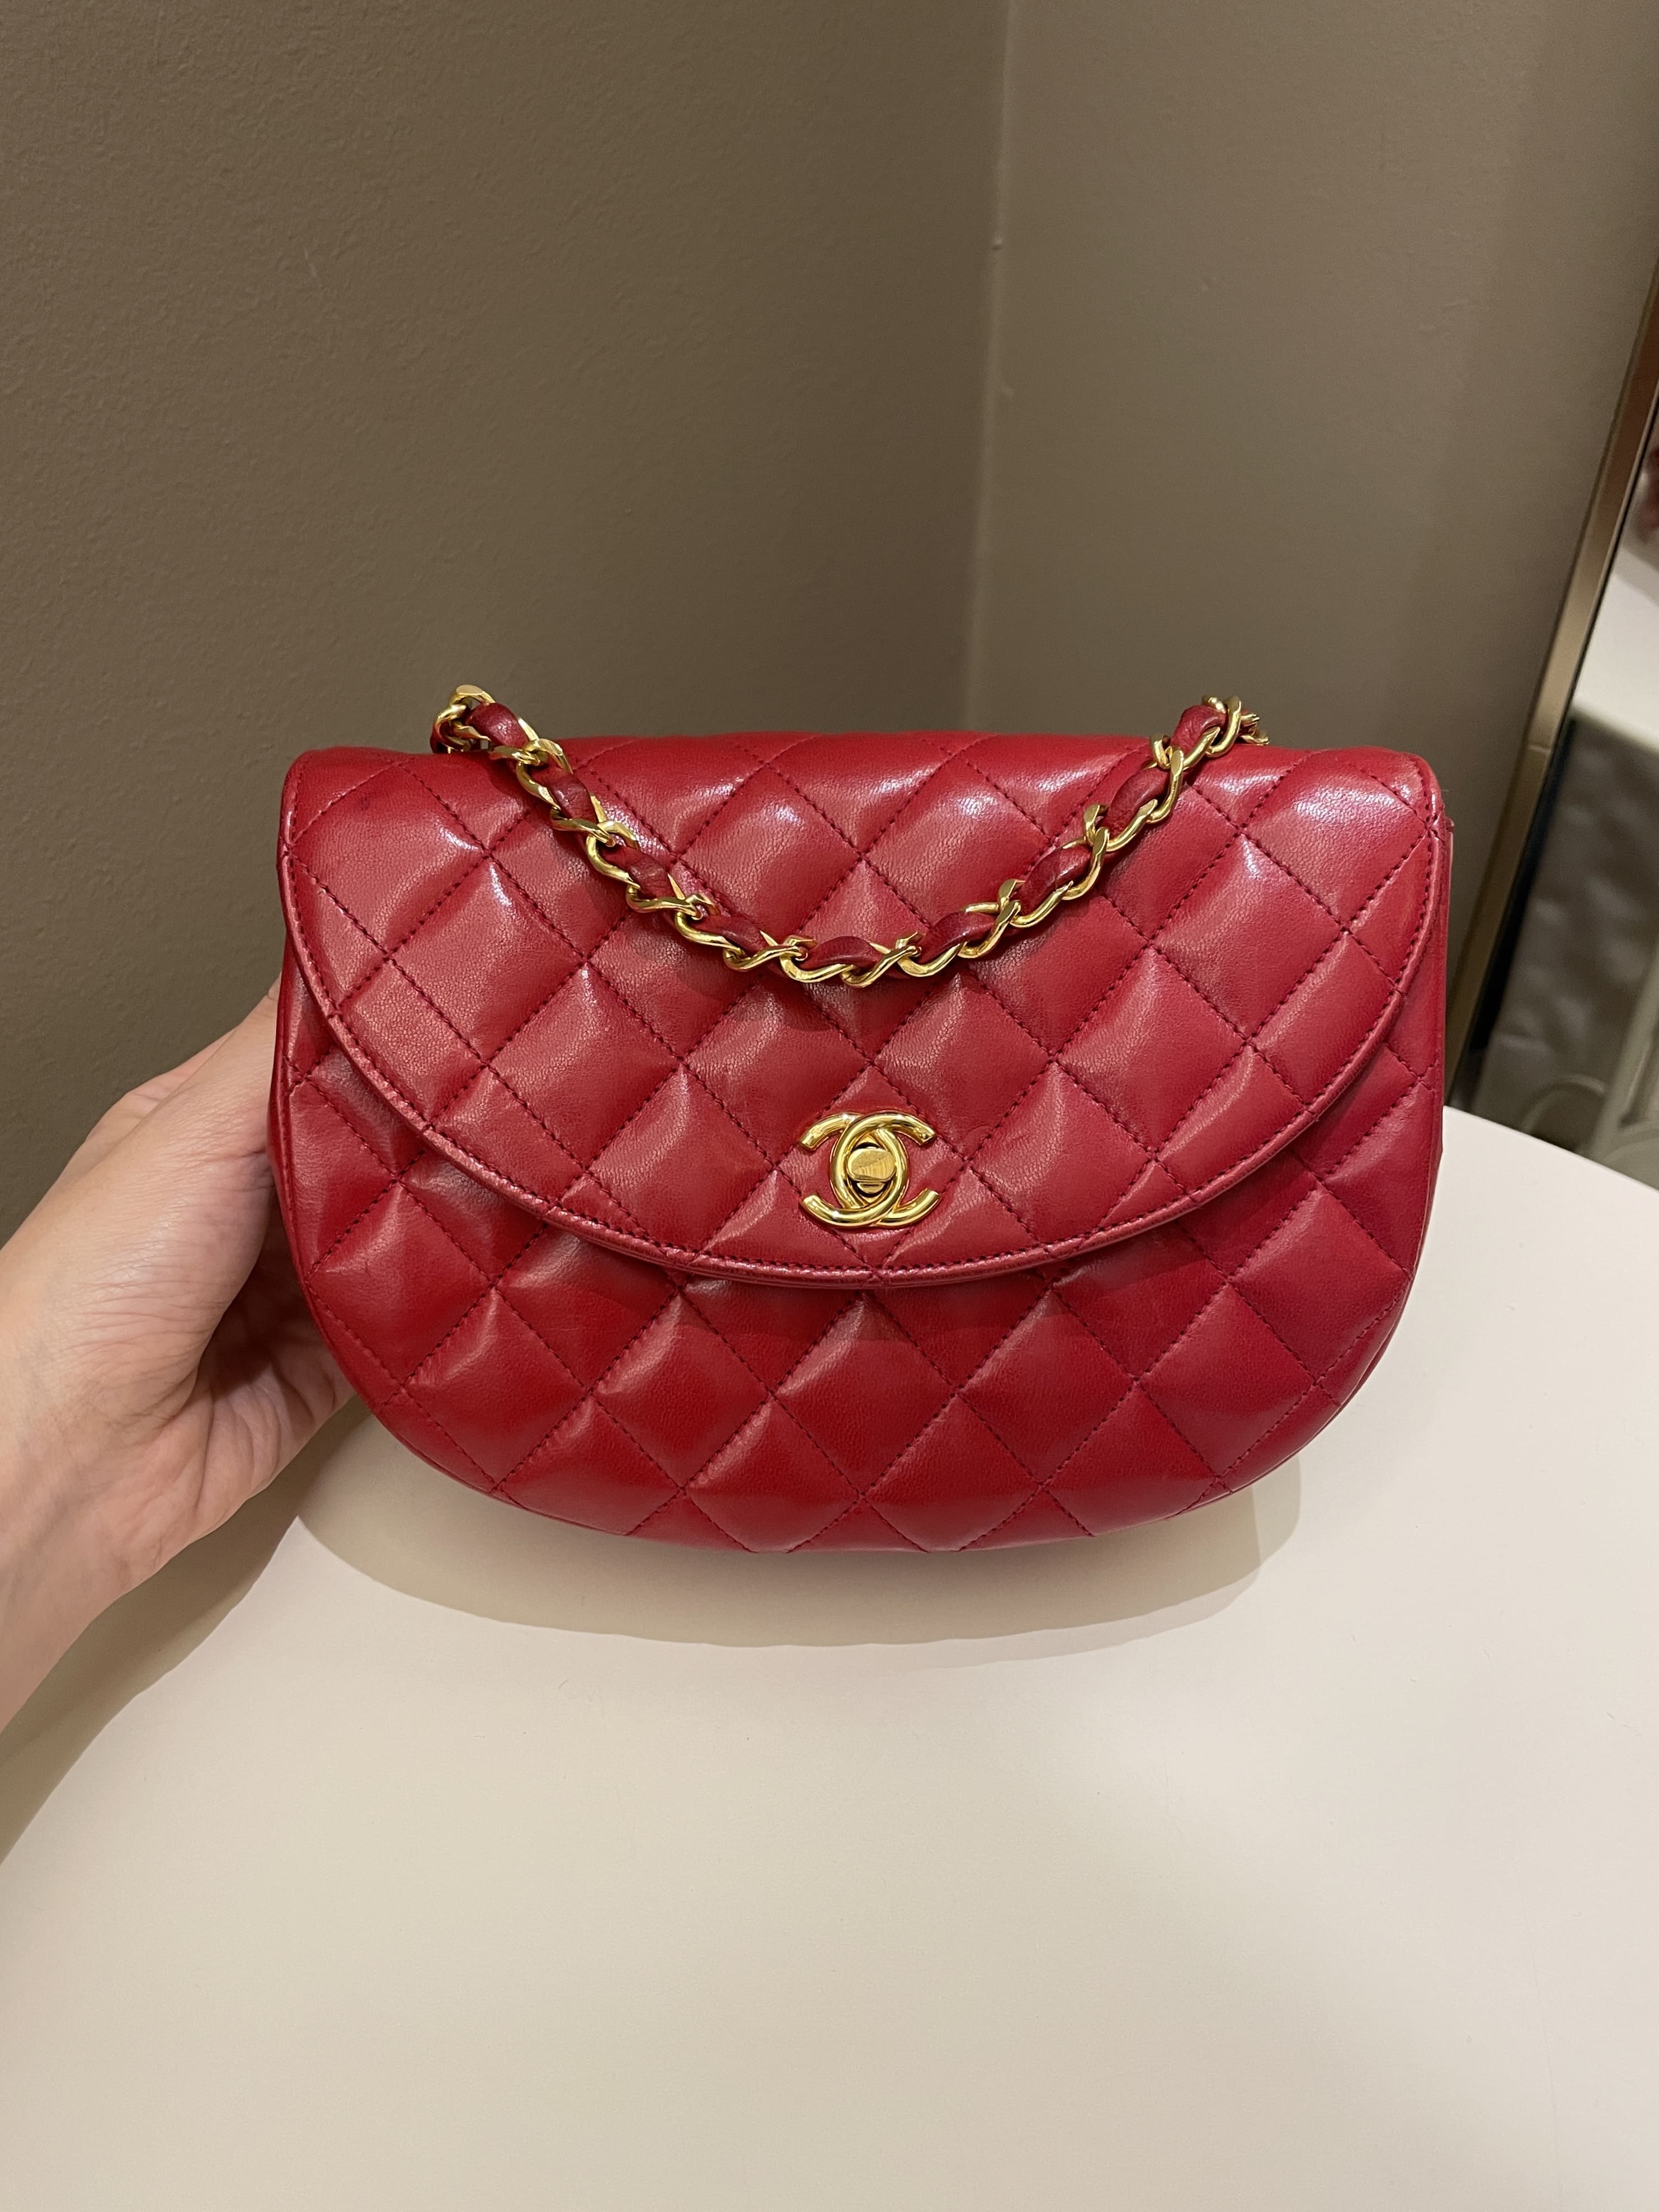 Chanel Vintage Quilted Red Lambskin Leather Oval Cross Body Bag